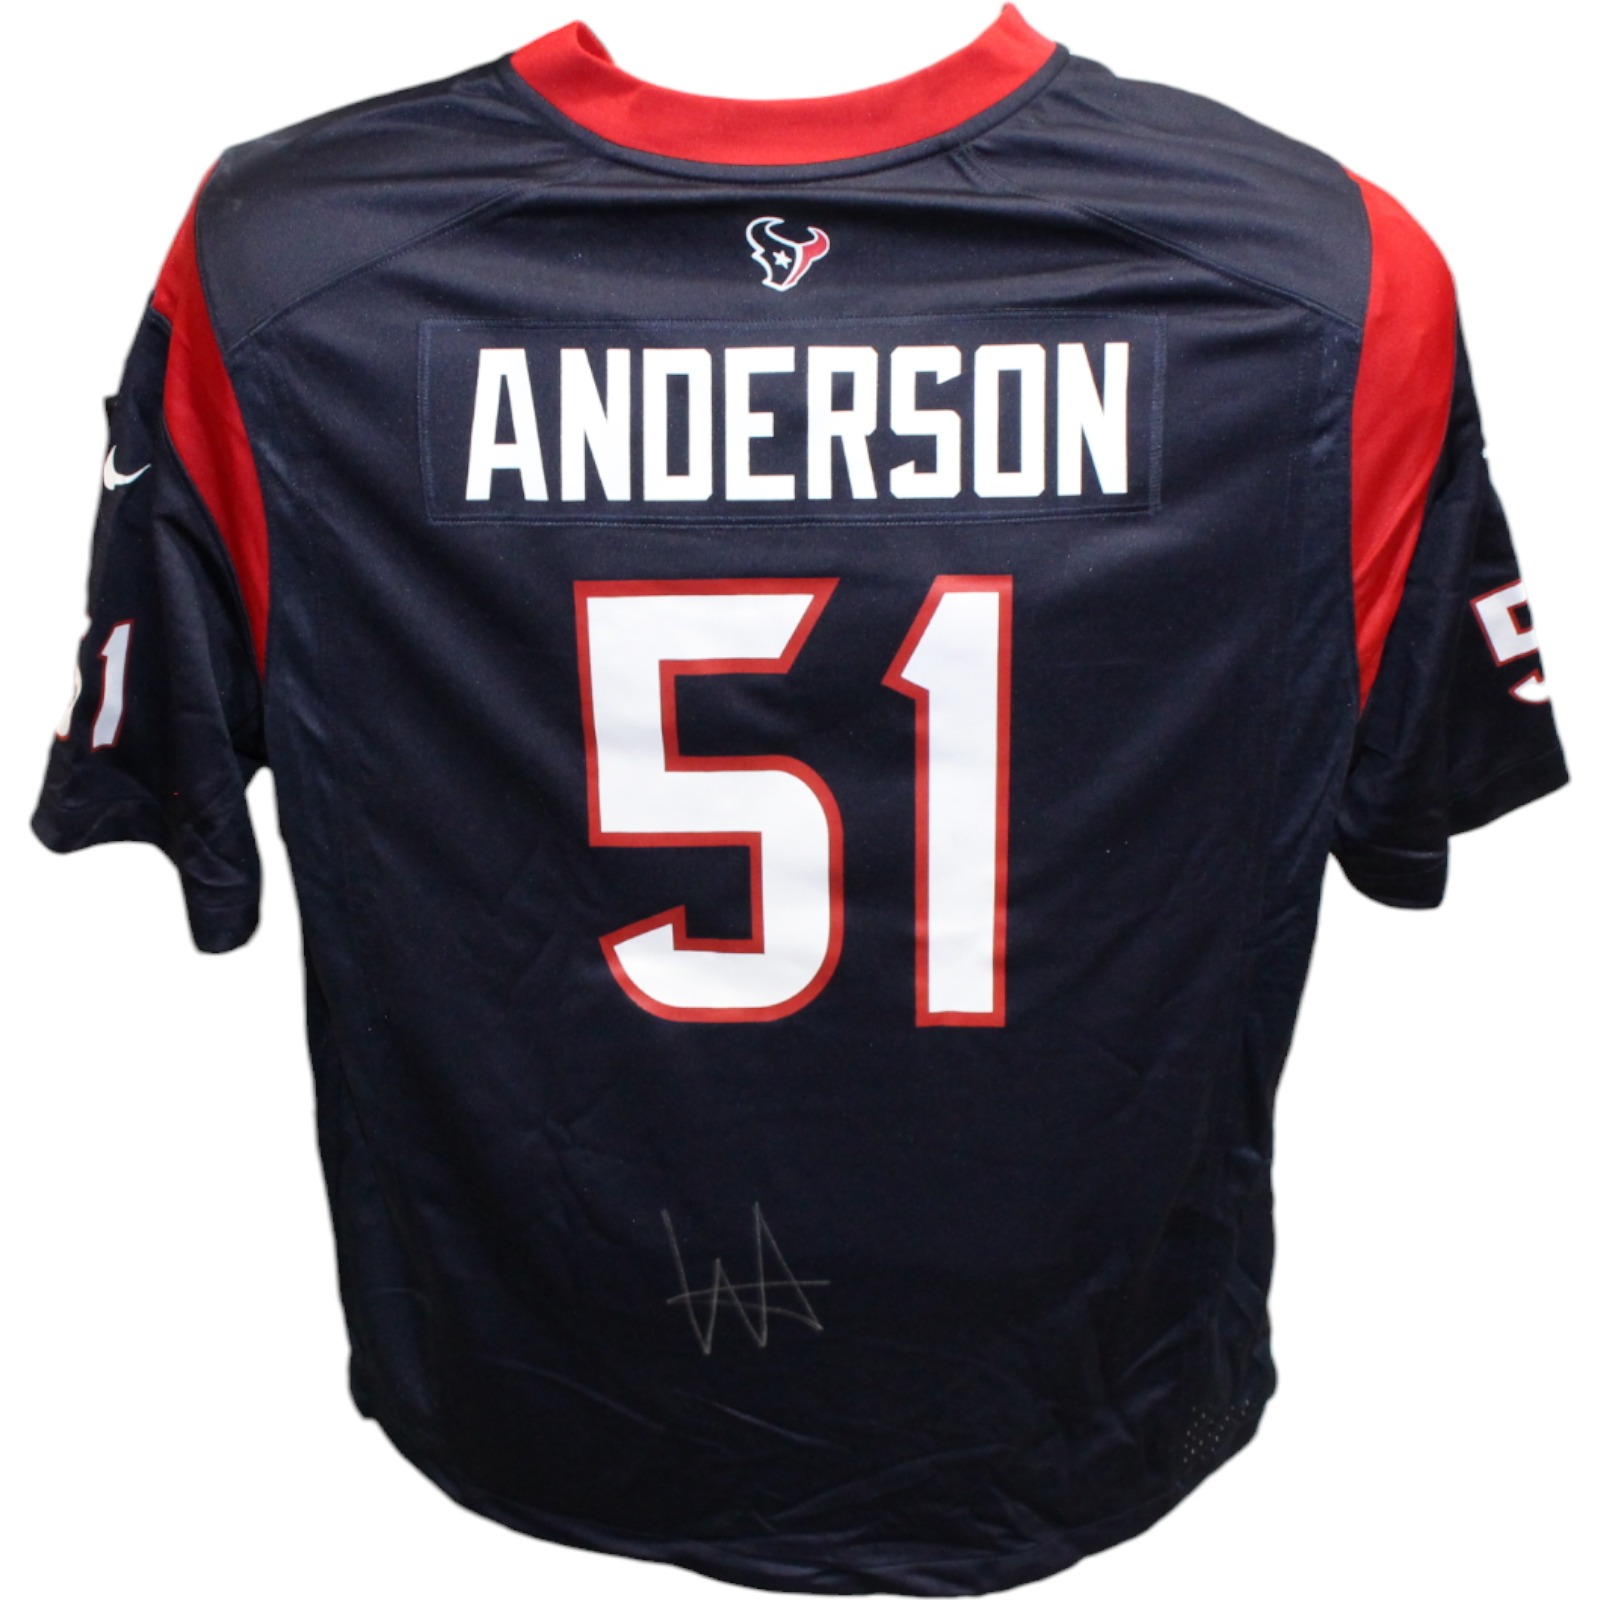 Will Anderson Signed Houston Texans Navy Nike XL Jersey FAN